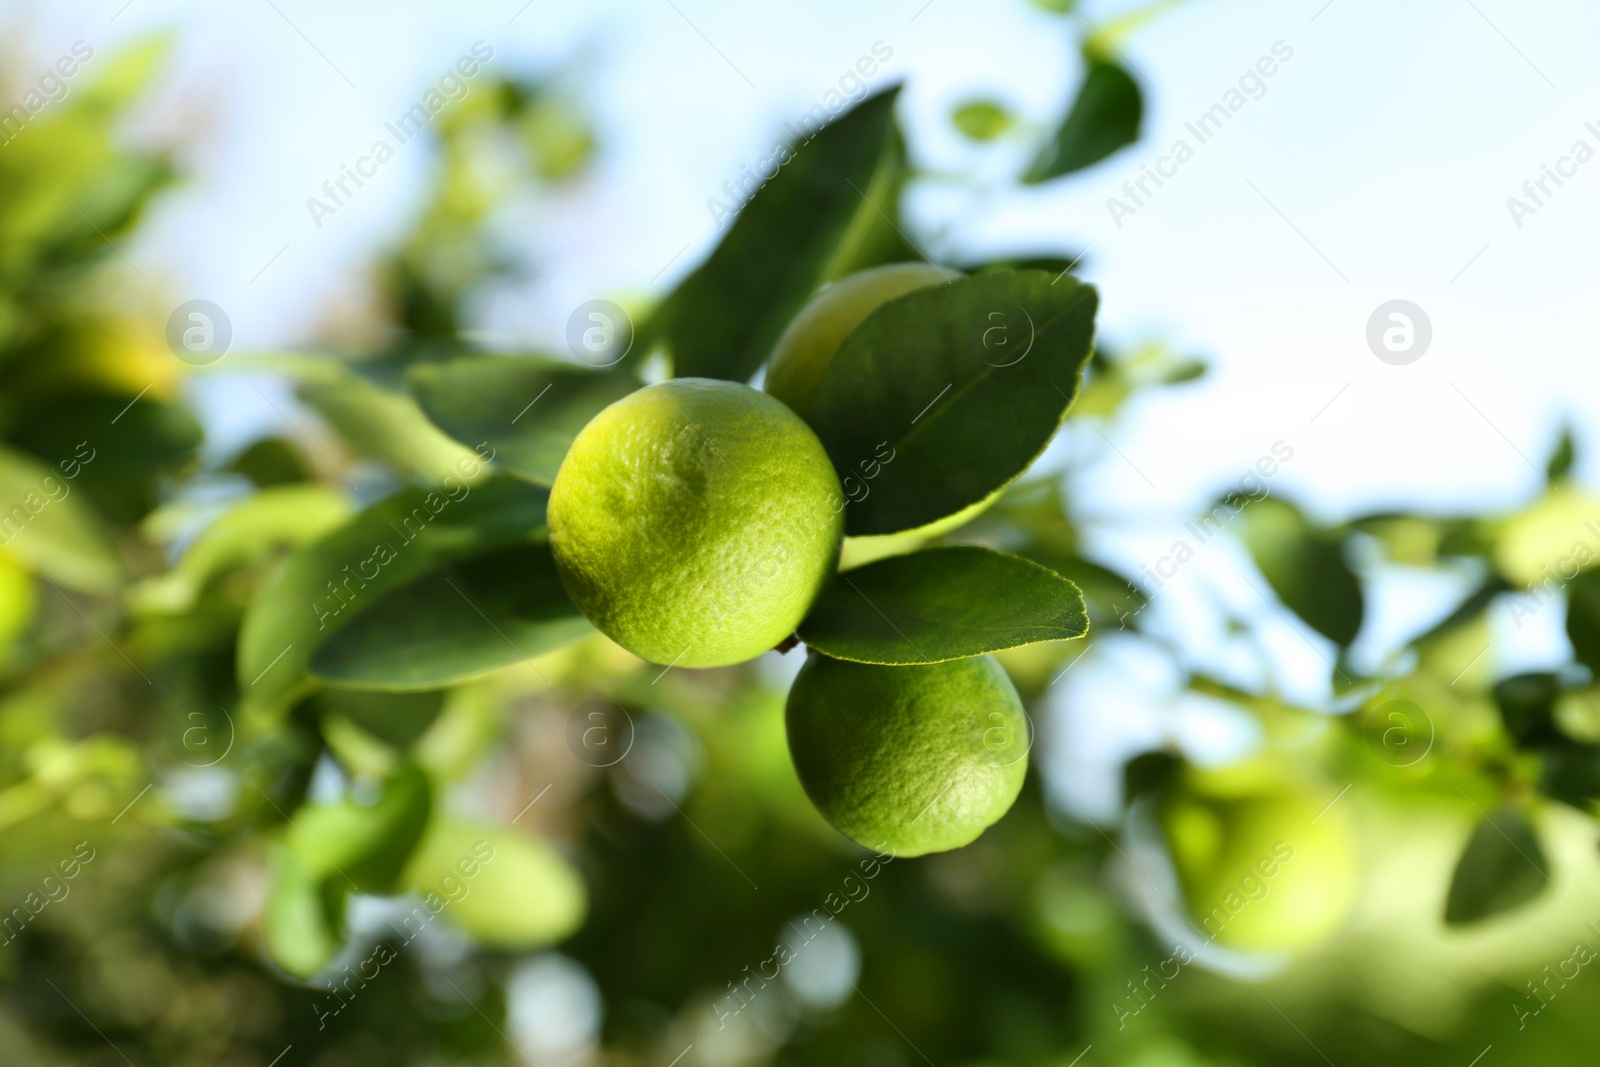 Photo of Ripe limes growing on tree branch in garden, closeup